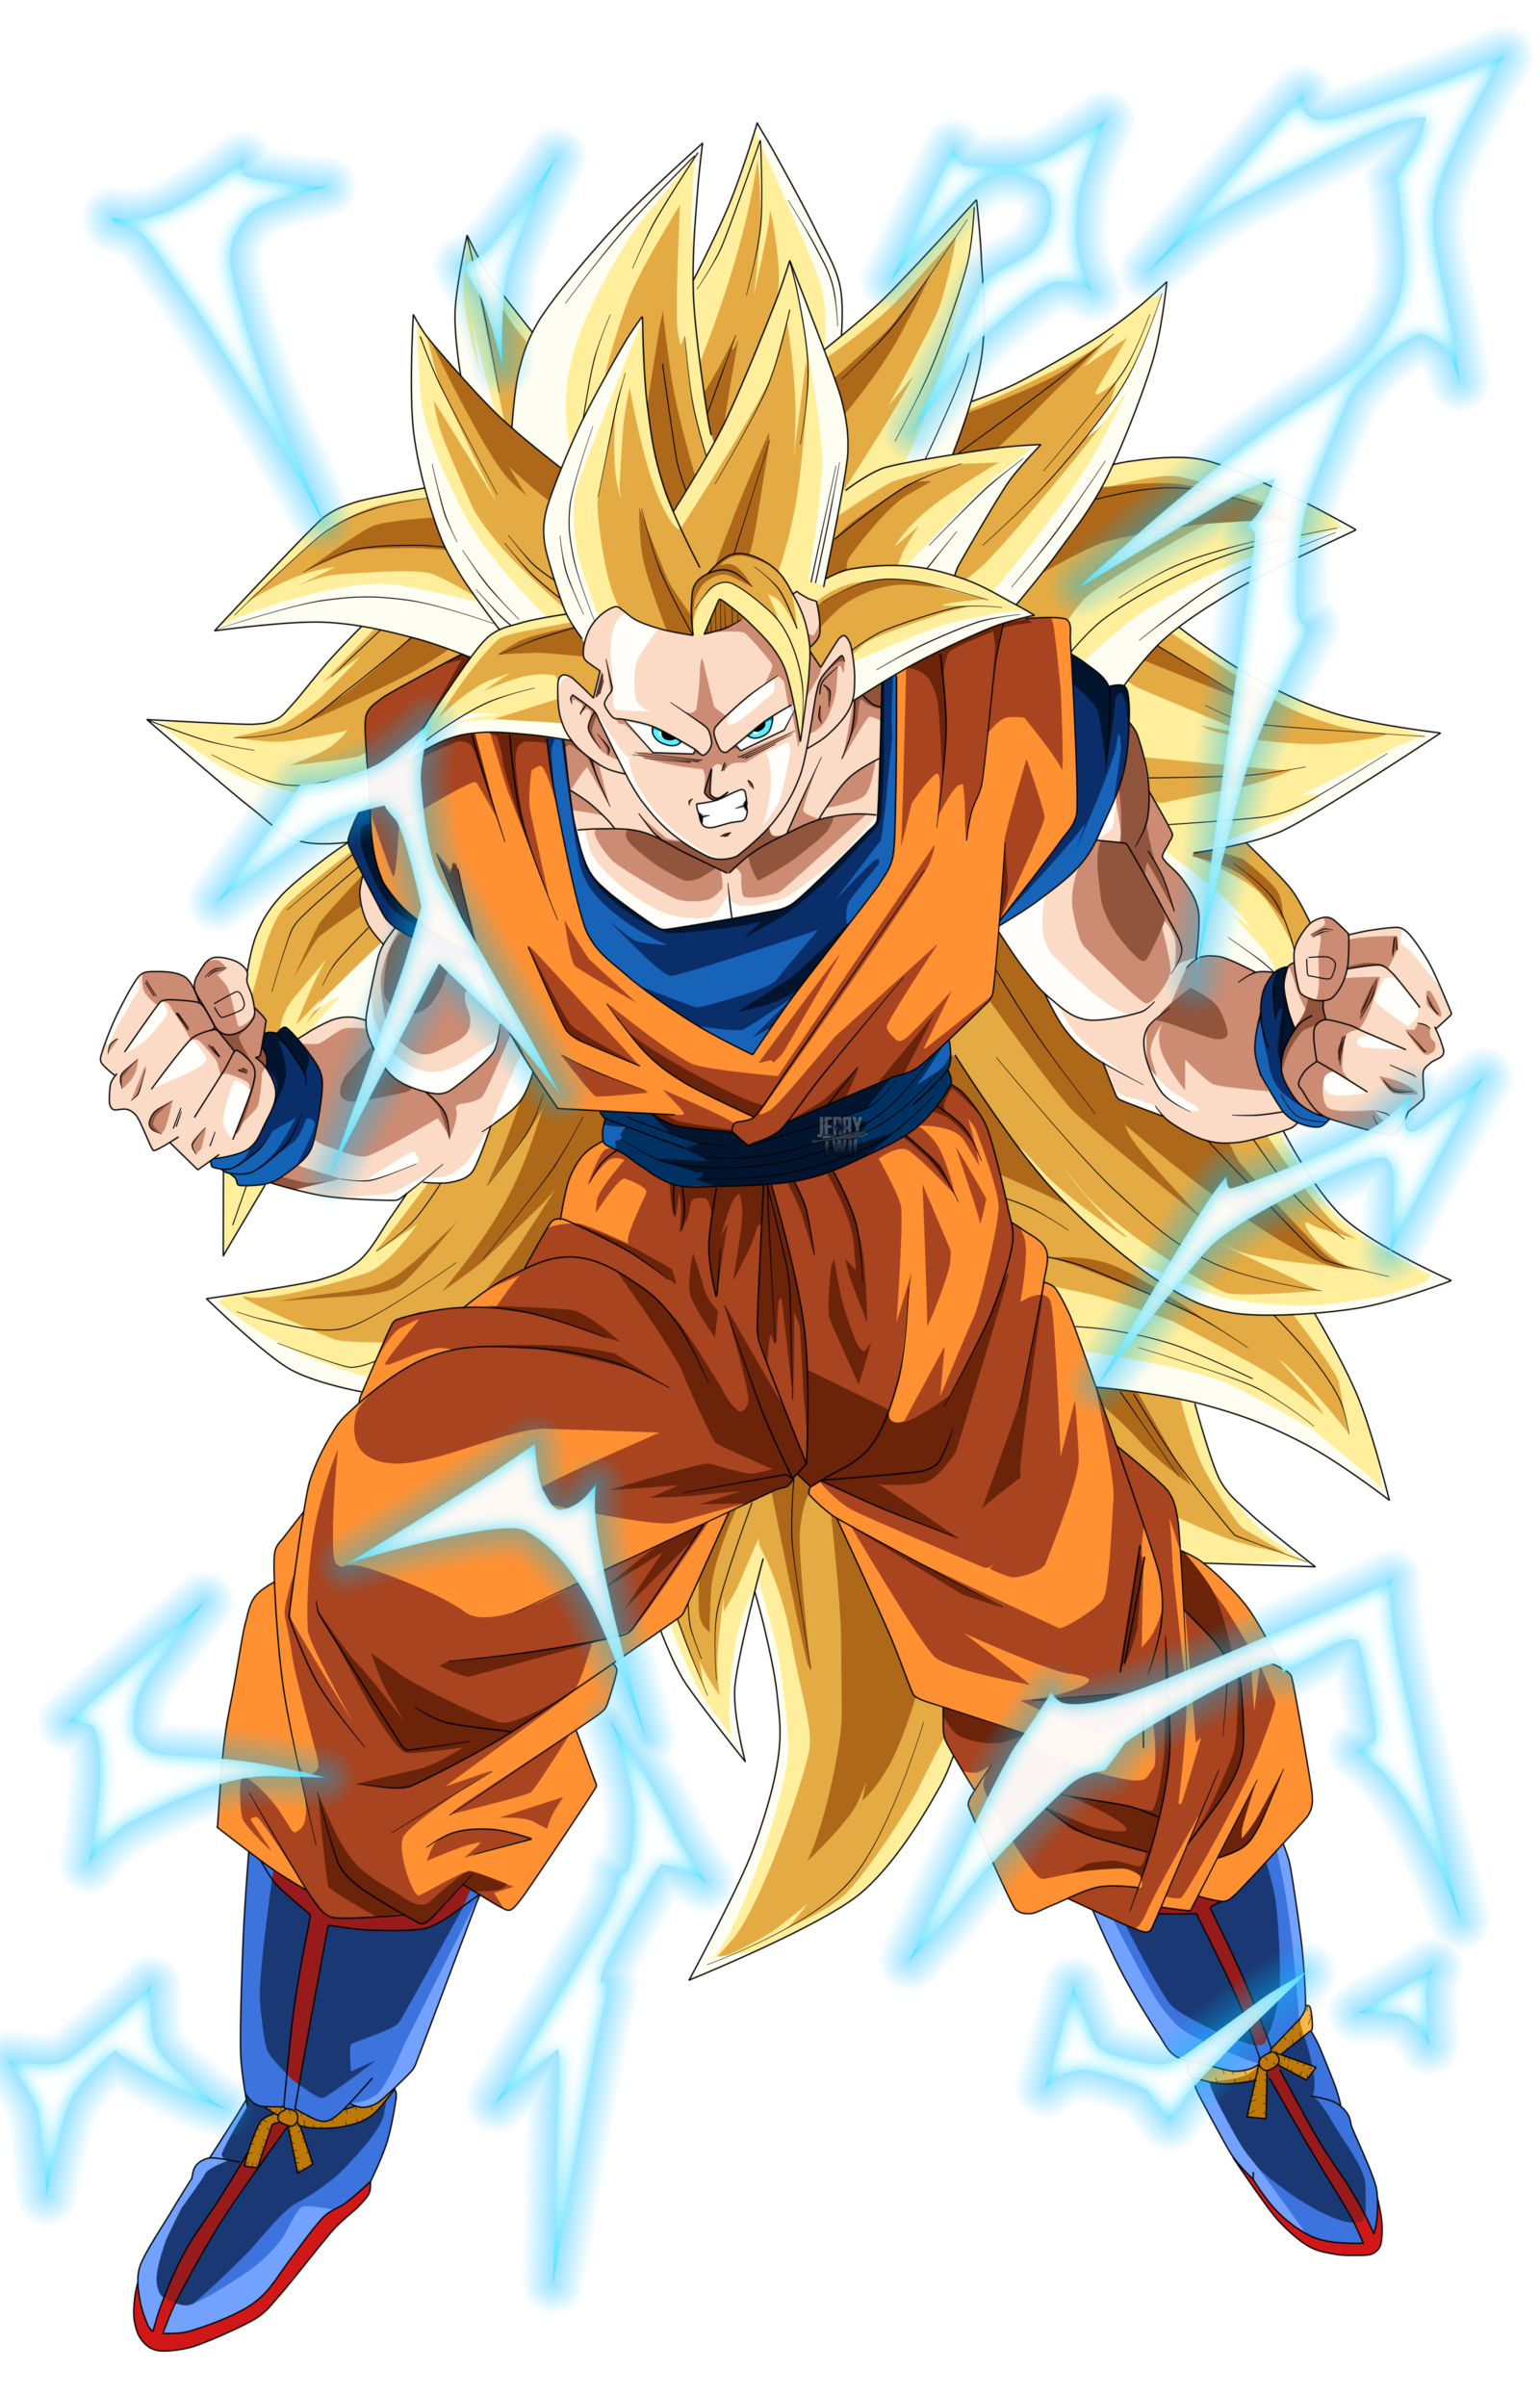 Goku, dragon ball character with blue electricity around png #42700